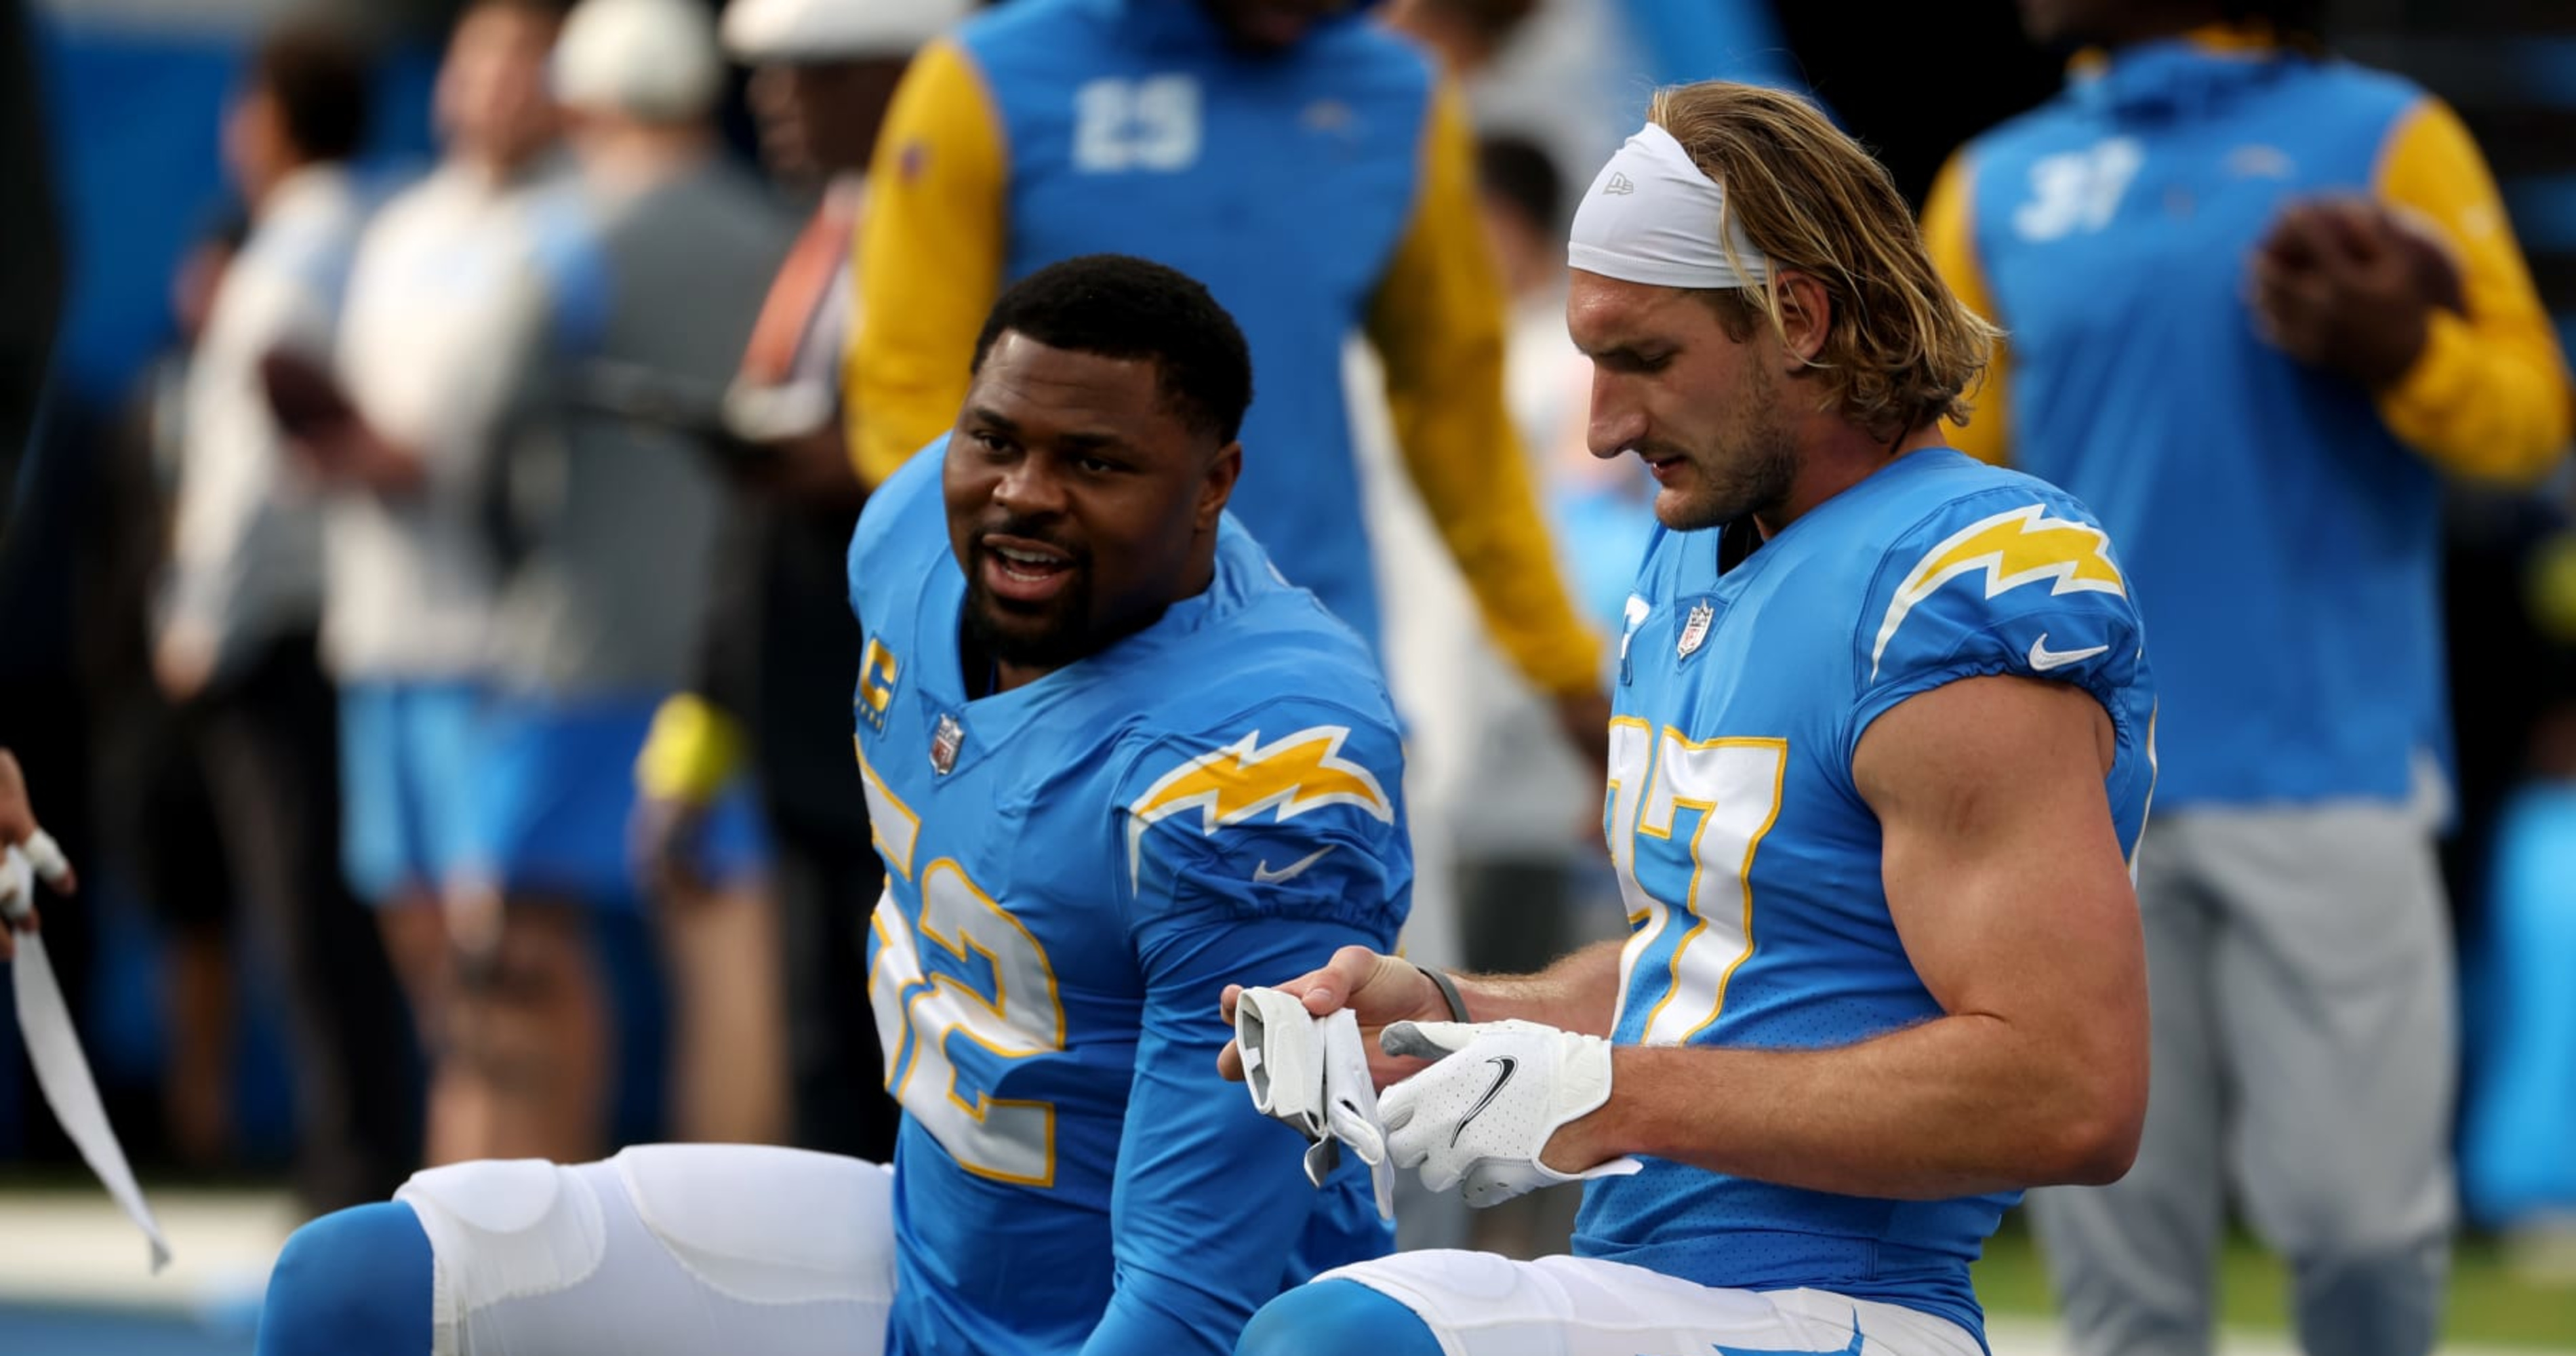 Reports: Chargers restructure Joey Bosa, Khalil Mack deals